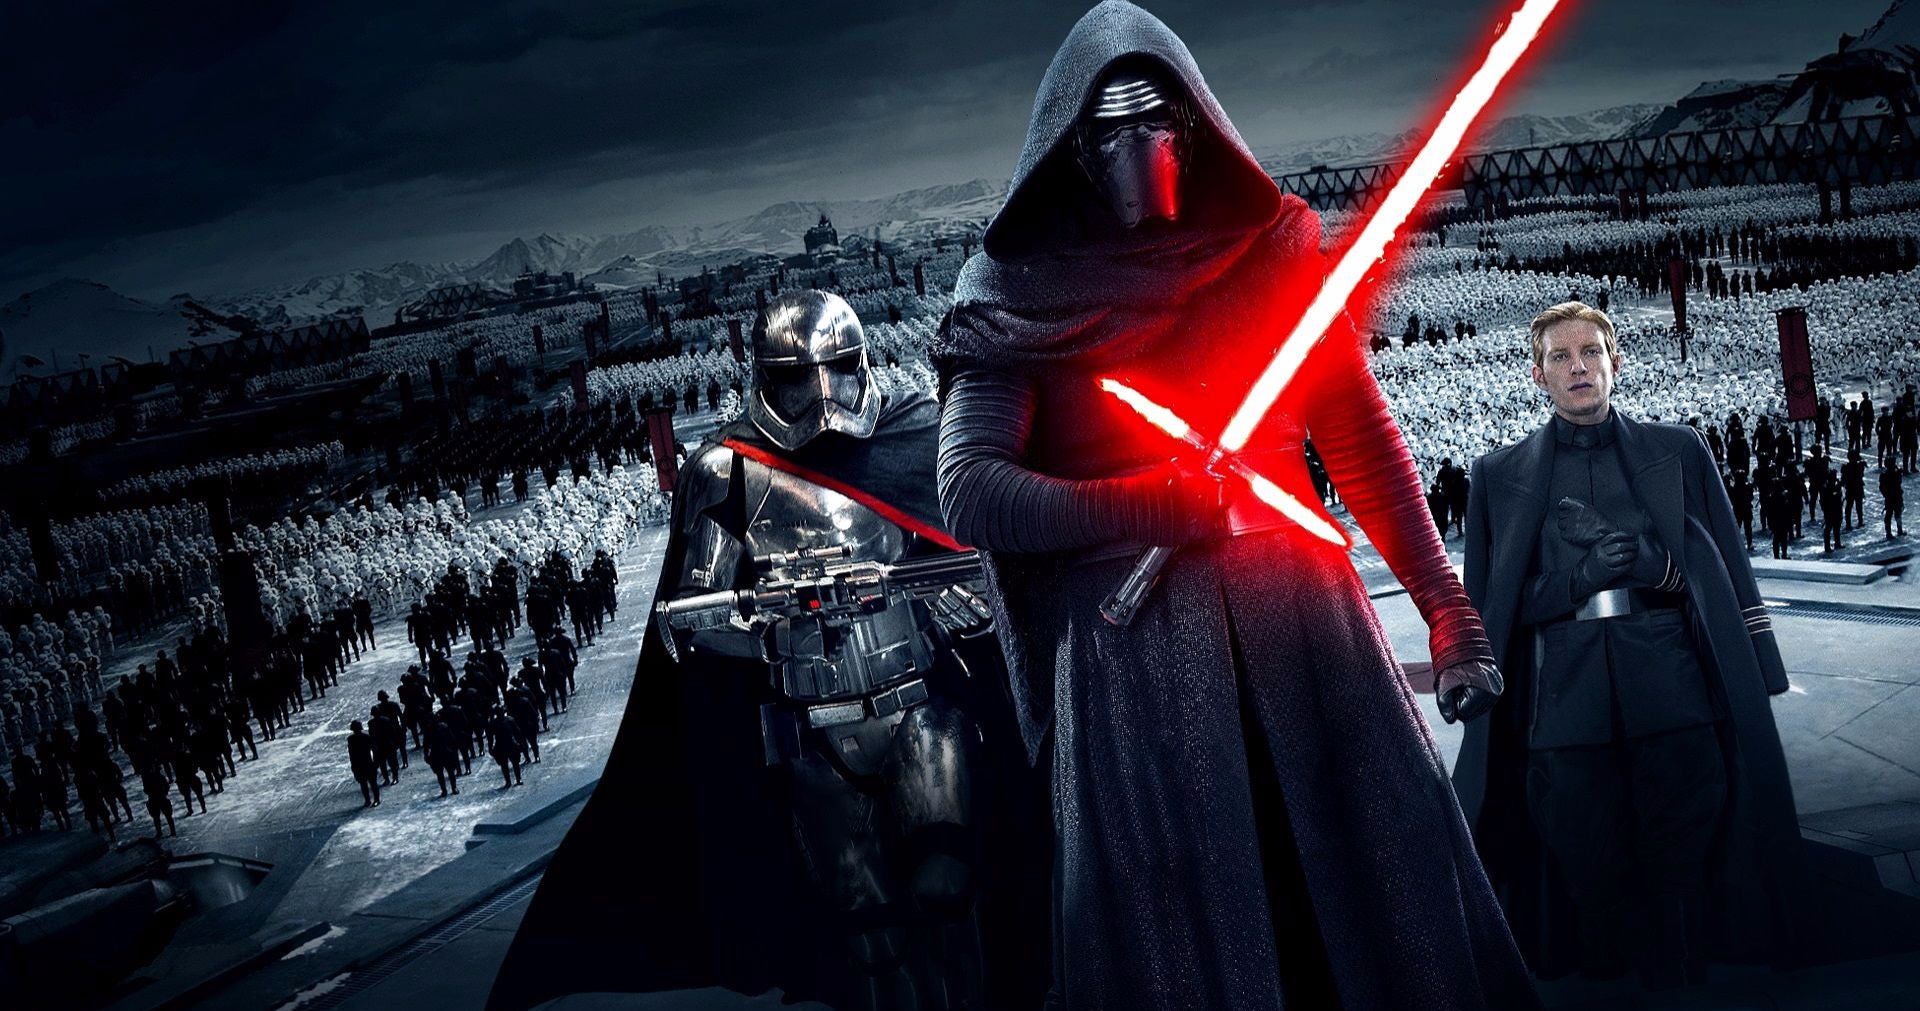 First Order Origins Revealed in New Star Wars Book